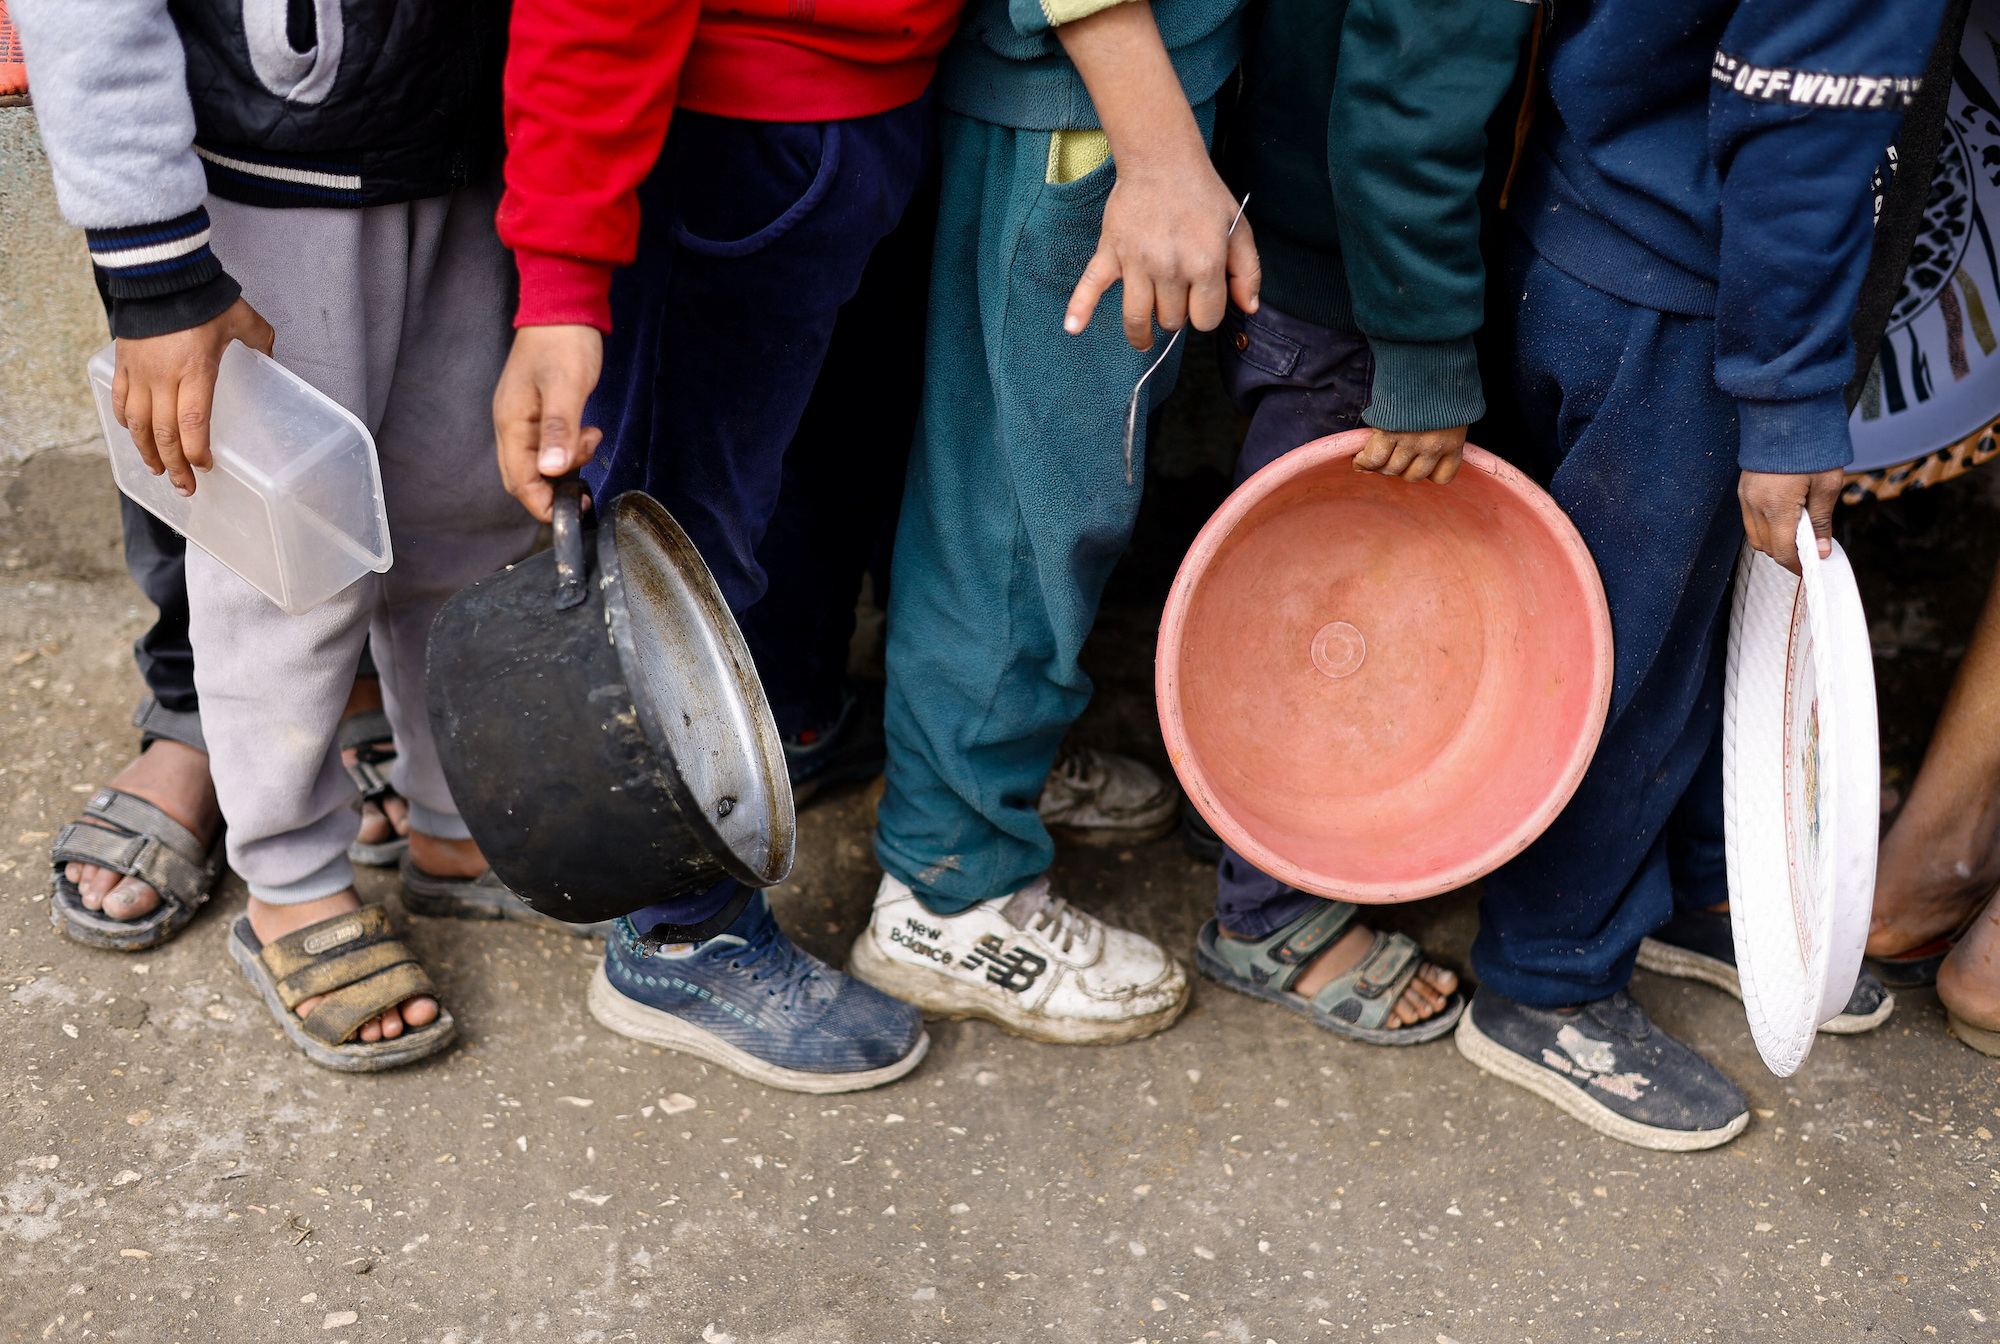 Palestinian children hold empty containers as they wait to receive food in Rafah, Gaza, on January 17.